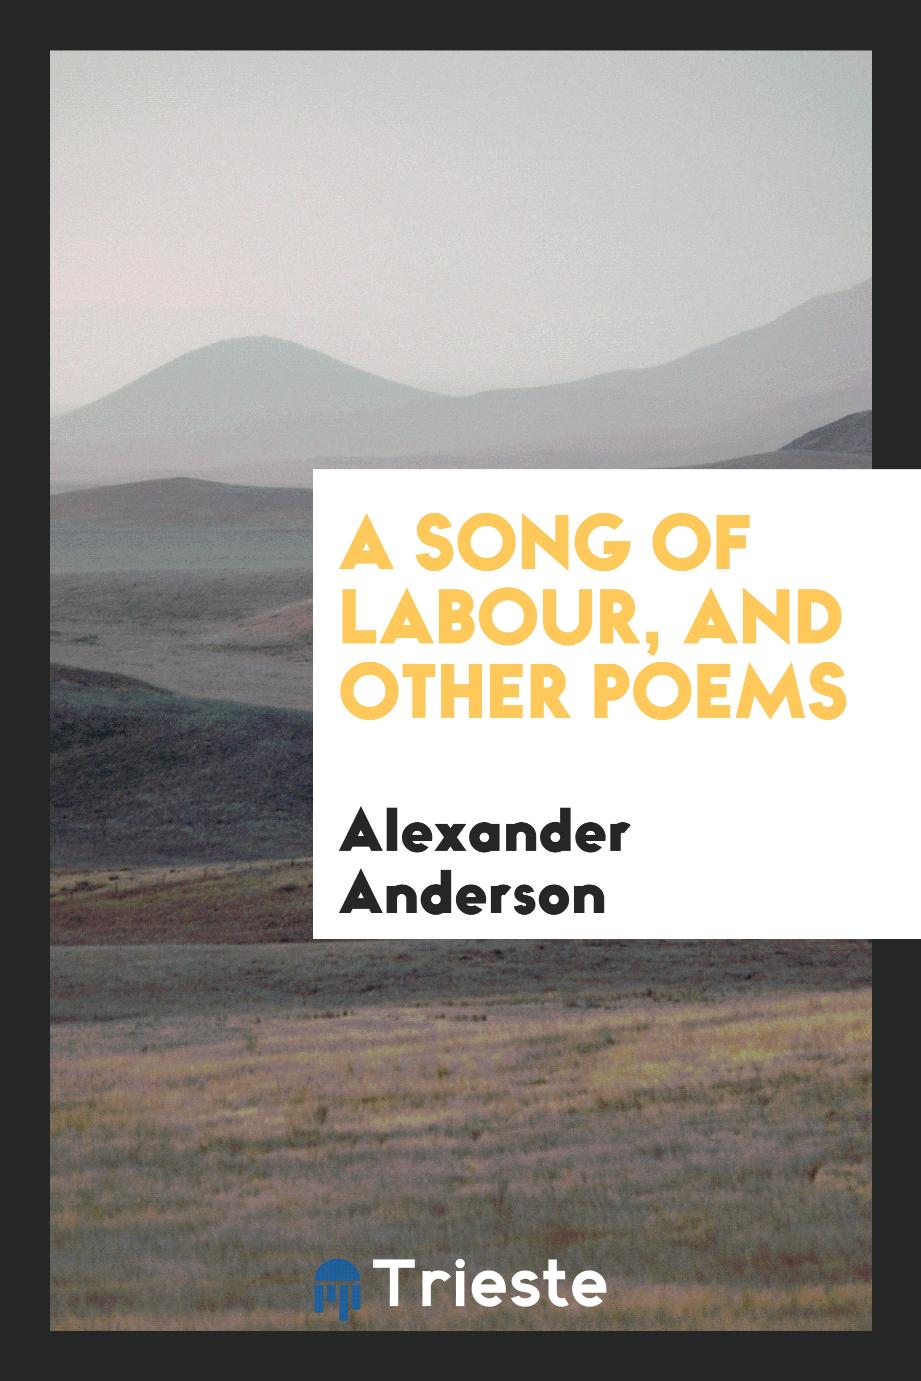 A song of labour, and other poems